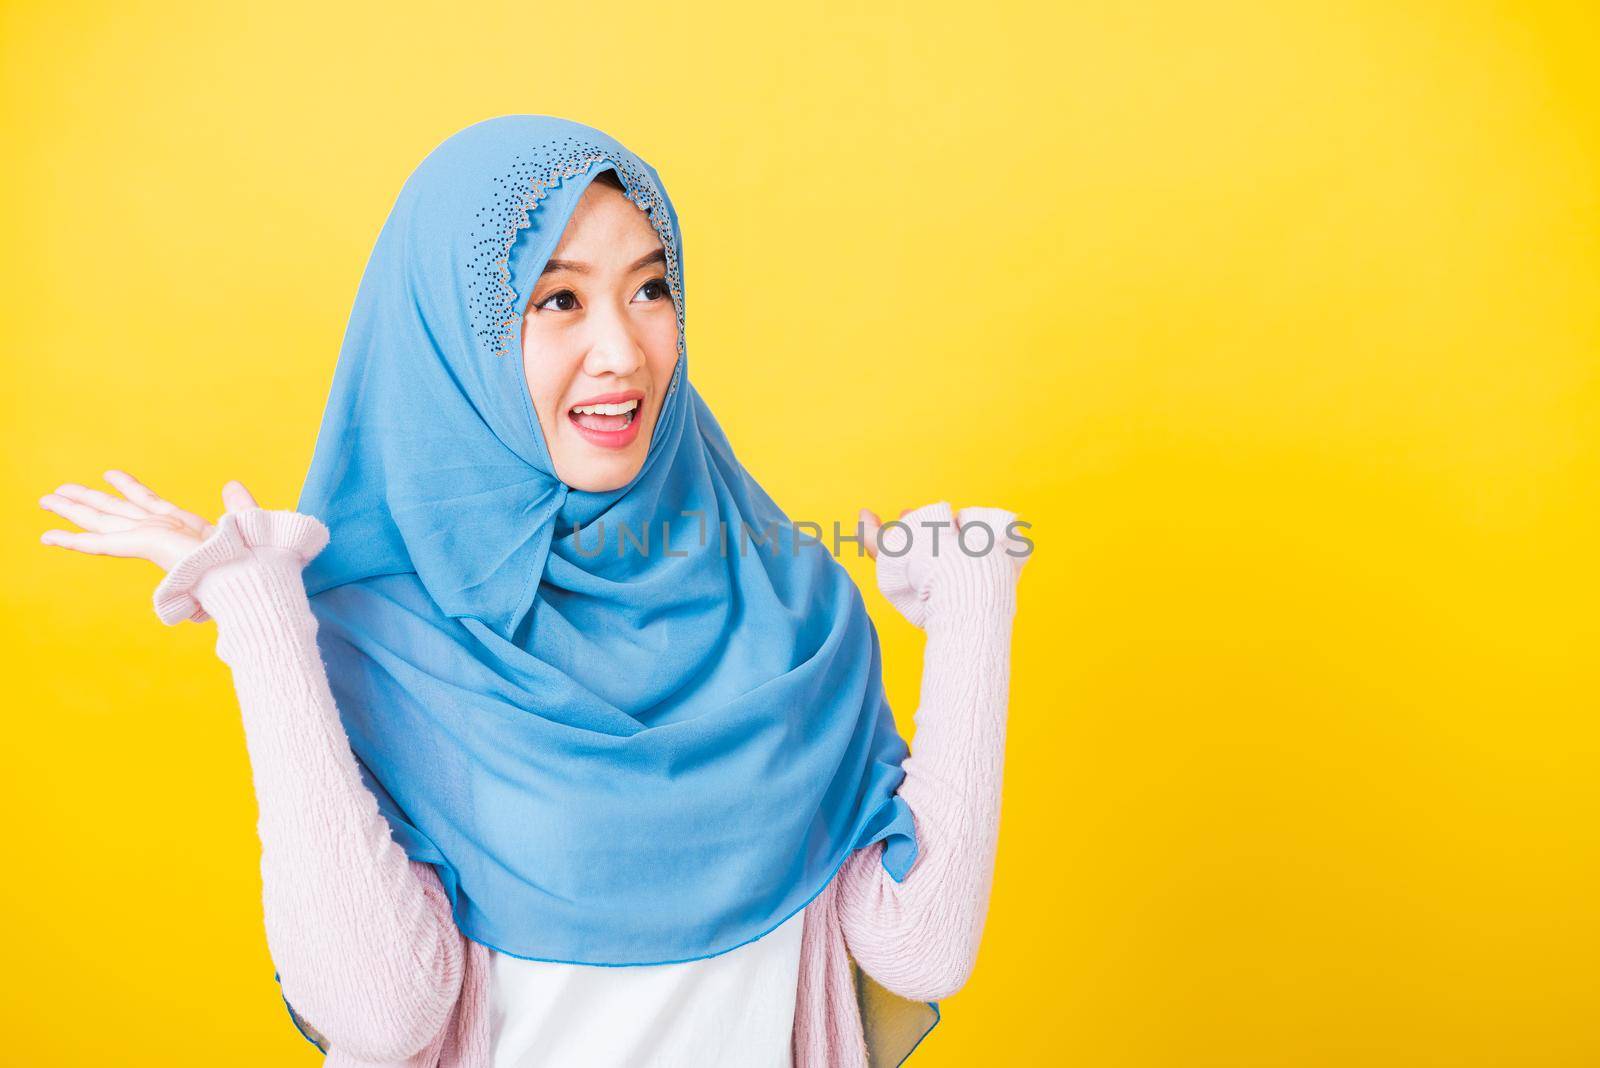 Asian Muslim Arab, Portrait of happy beautiful young woman Islam religious wear veil hijab funny smile she victories expression raises hands glad excited cheerful isolated yellow background